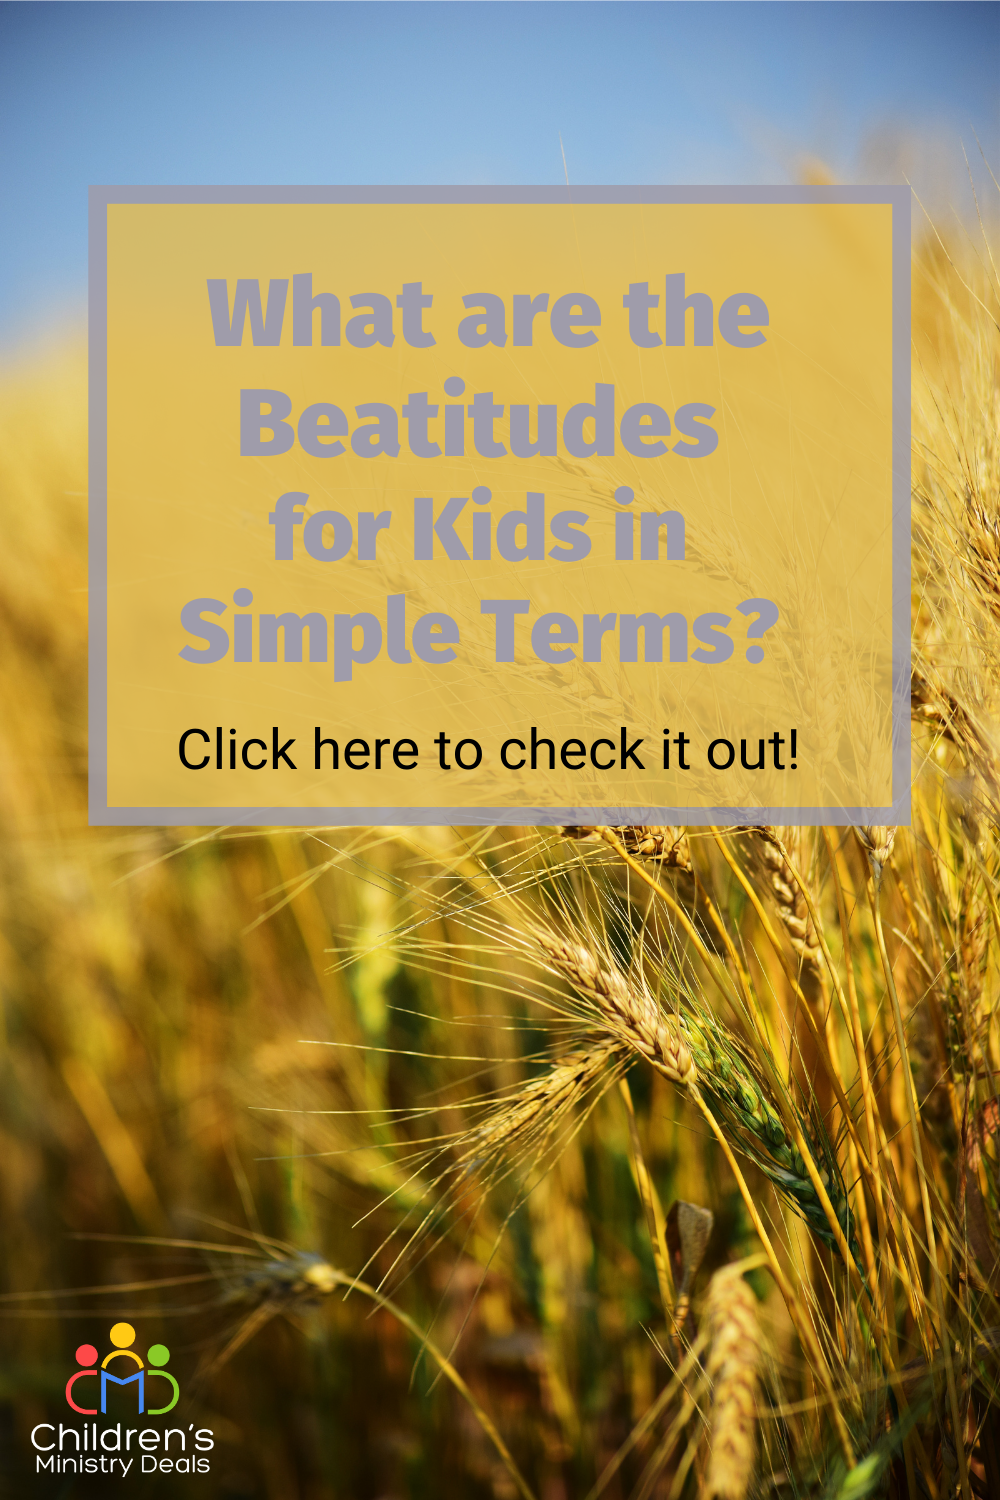 What are the Beatitudes for Kids in Simple Terms?